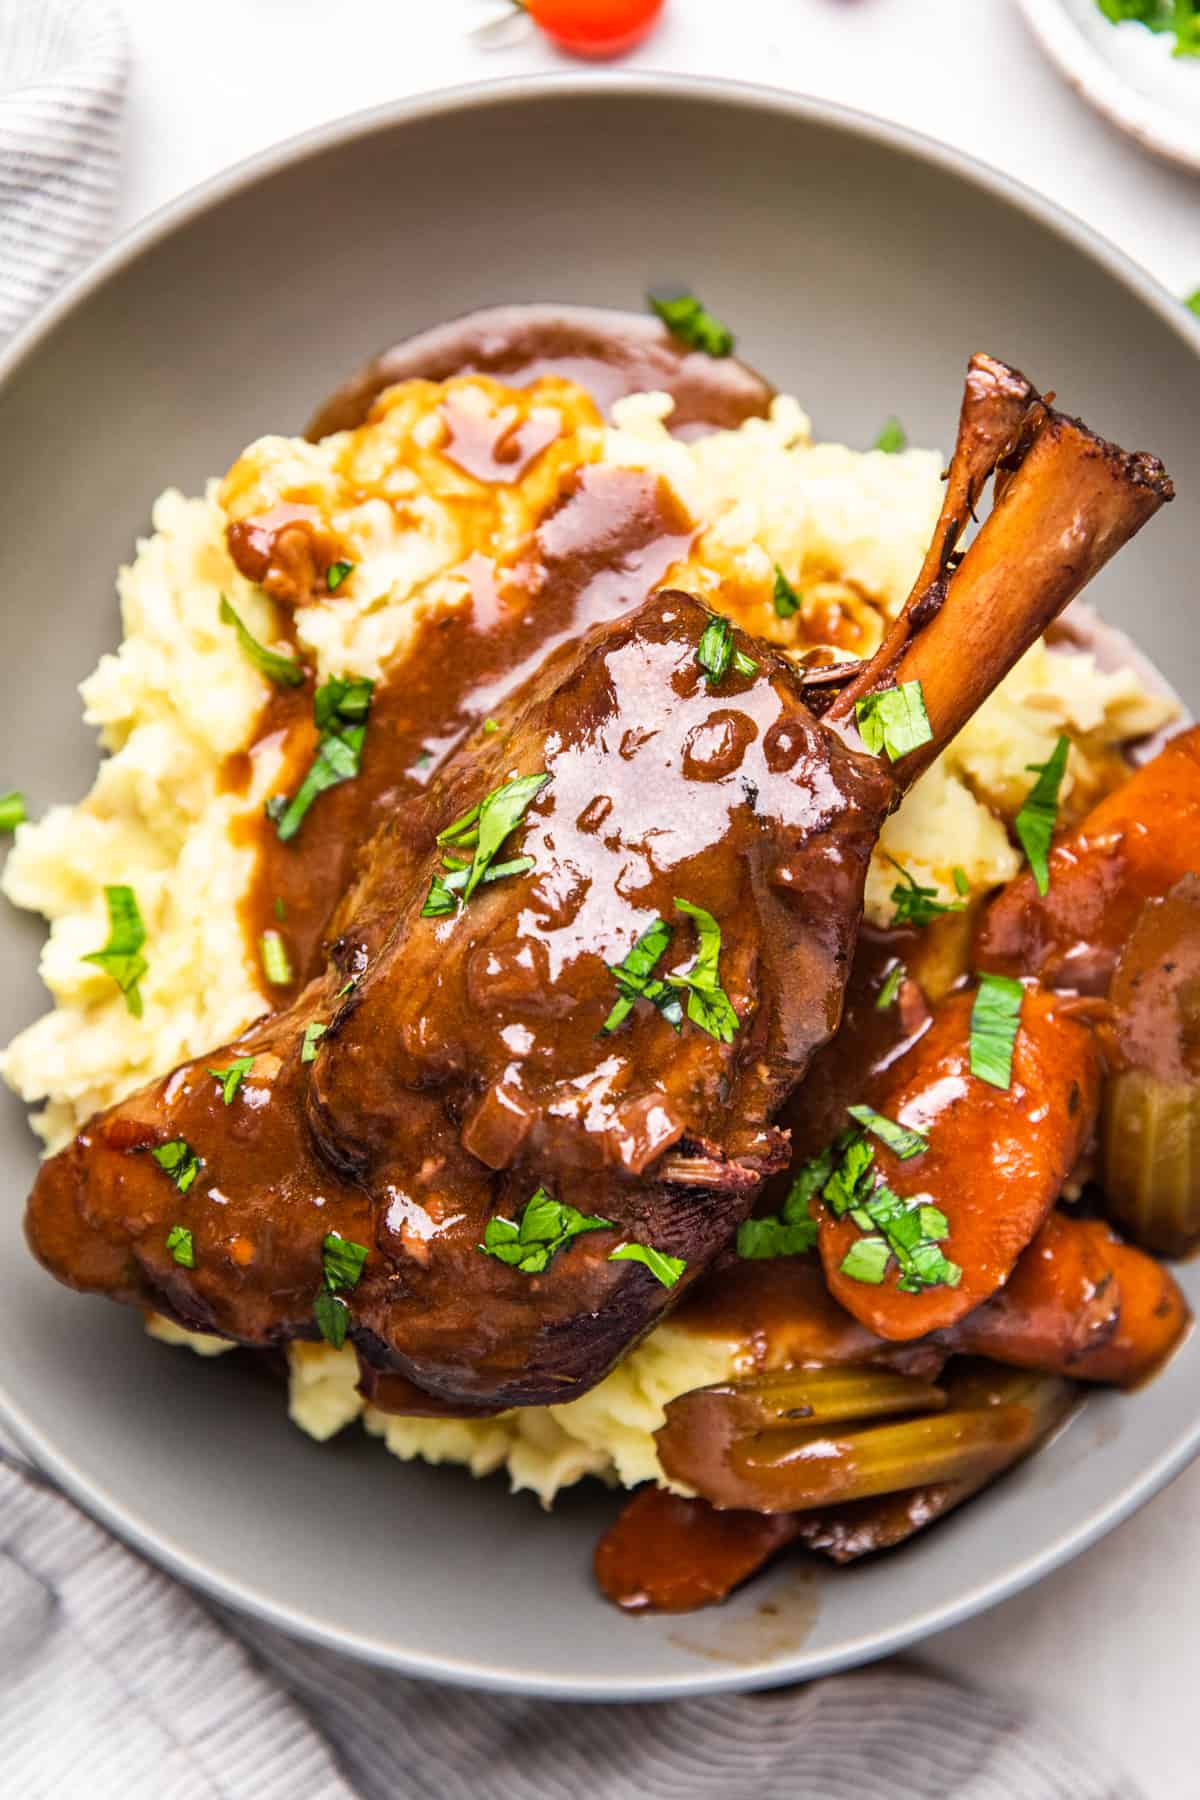 Lamb shank with gravy, vegetables, amd mashed potatoes in a grey bowl.